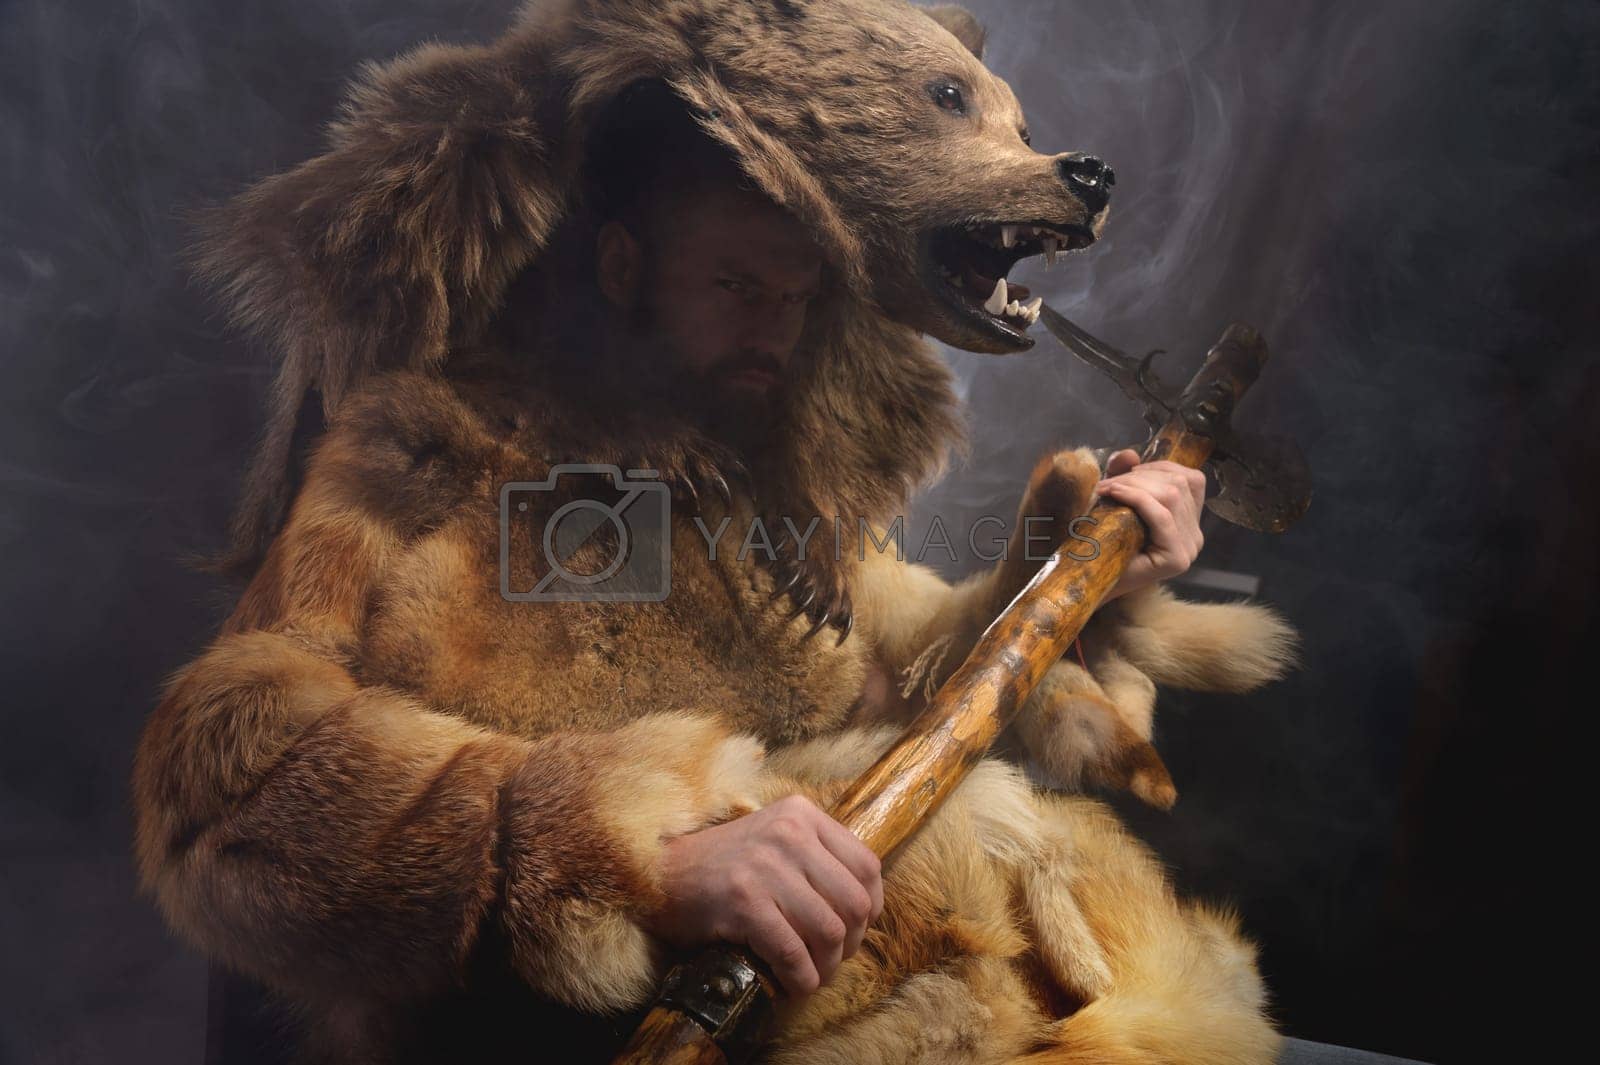 Royalty free image of man with a bear's head, clothes made from the skin of an animal. Warrior cosplay costume by yanik88